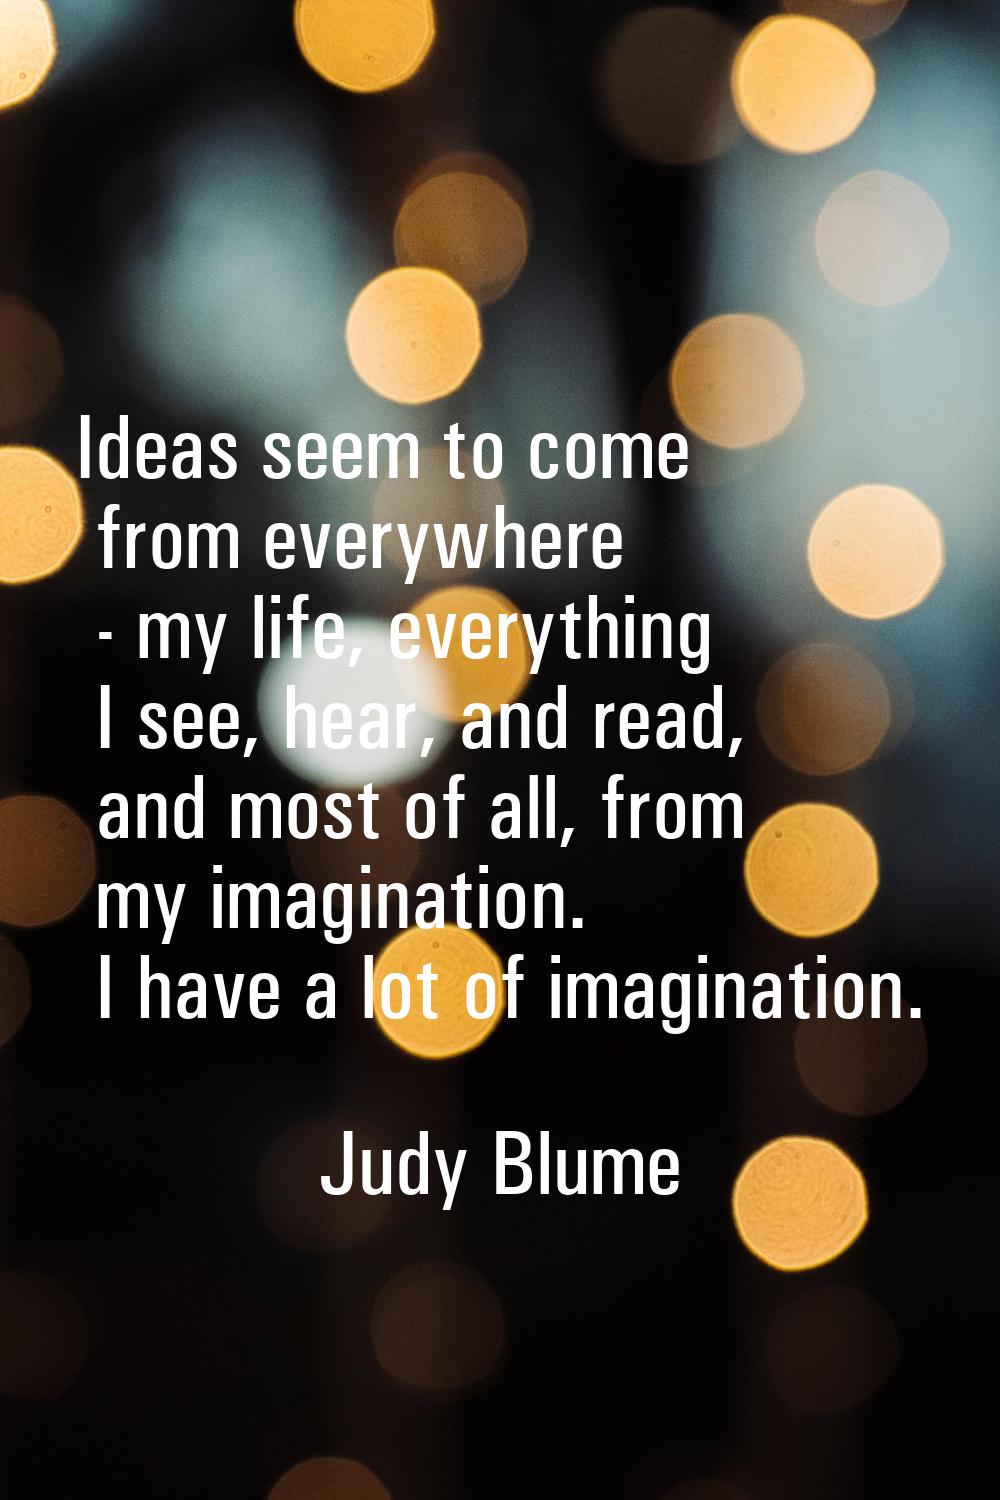 Ideas seem to come from everywhere - my life, everything I see, hear, and read, and most of all, fr